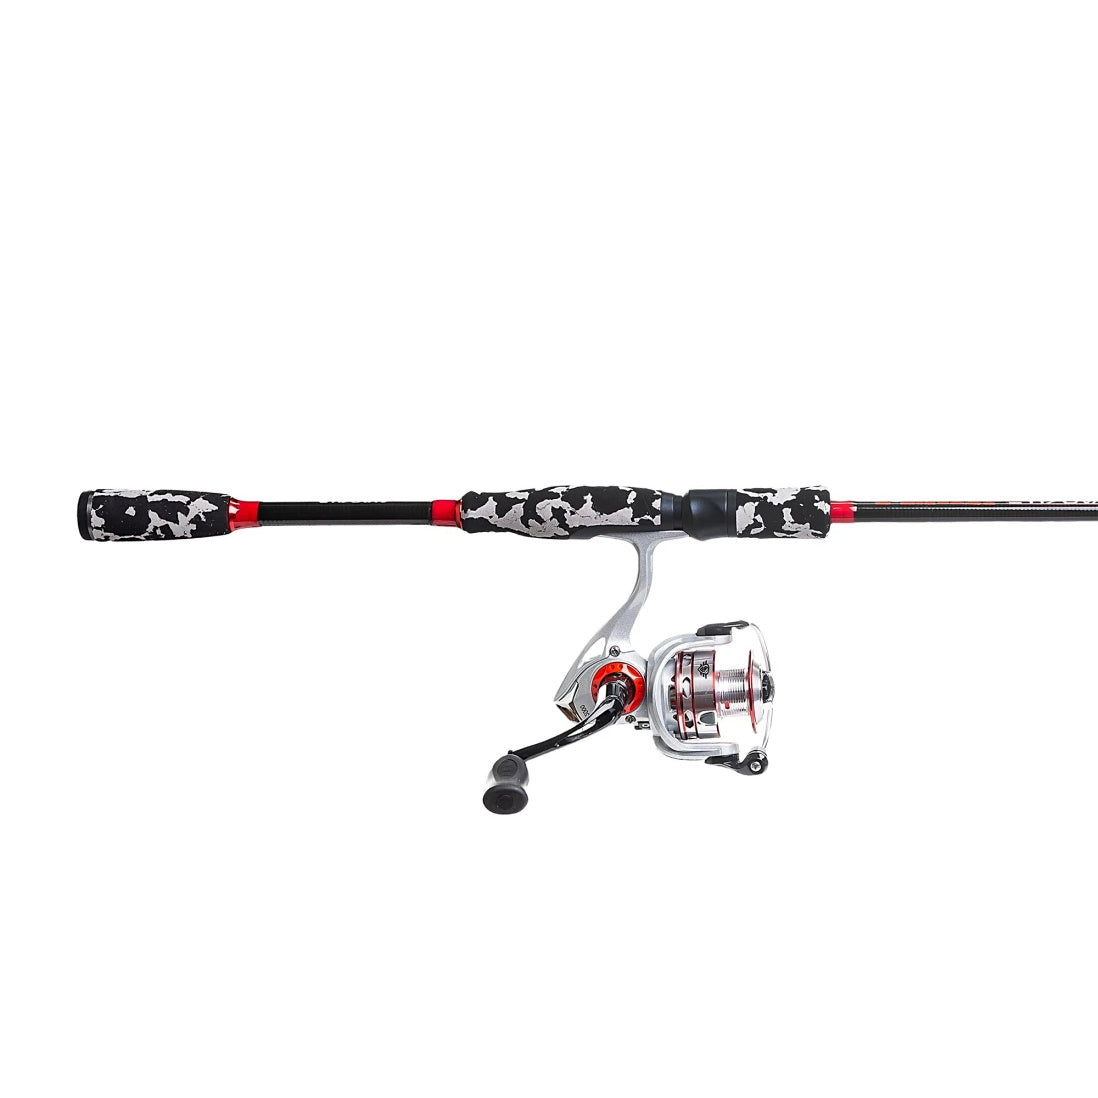 FAVORITE FISHING ARMY SPINNING COMBO 7 – MC Tactical